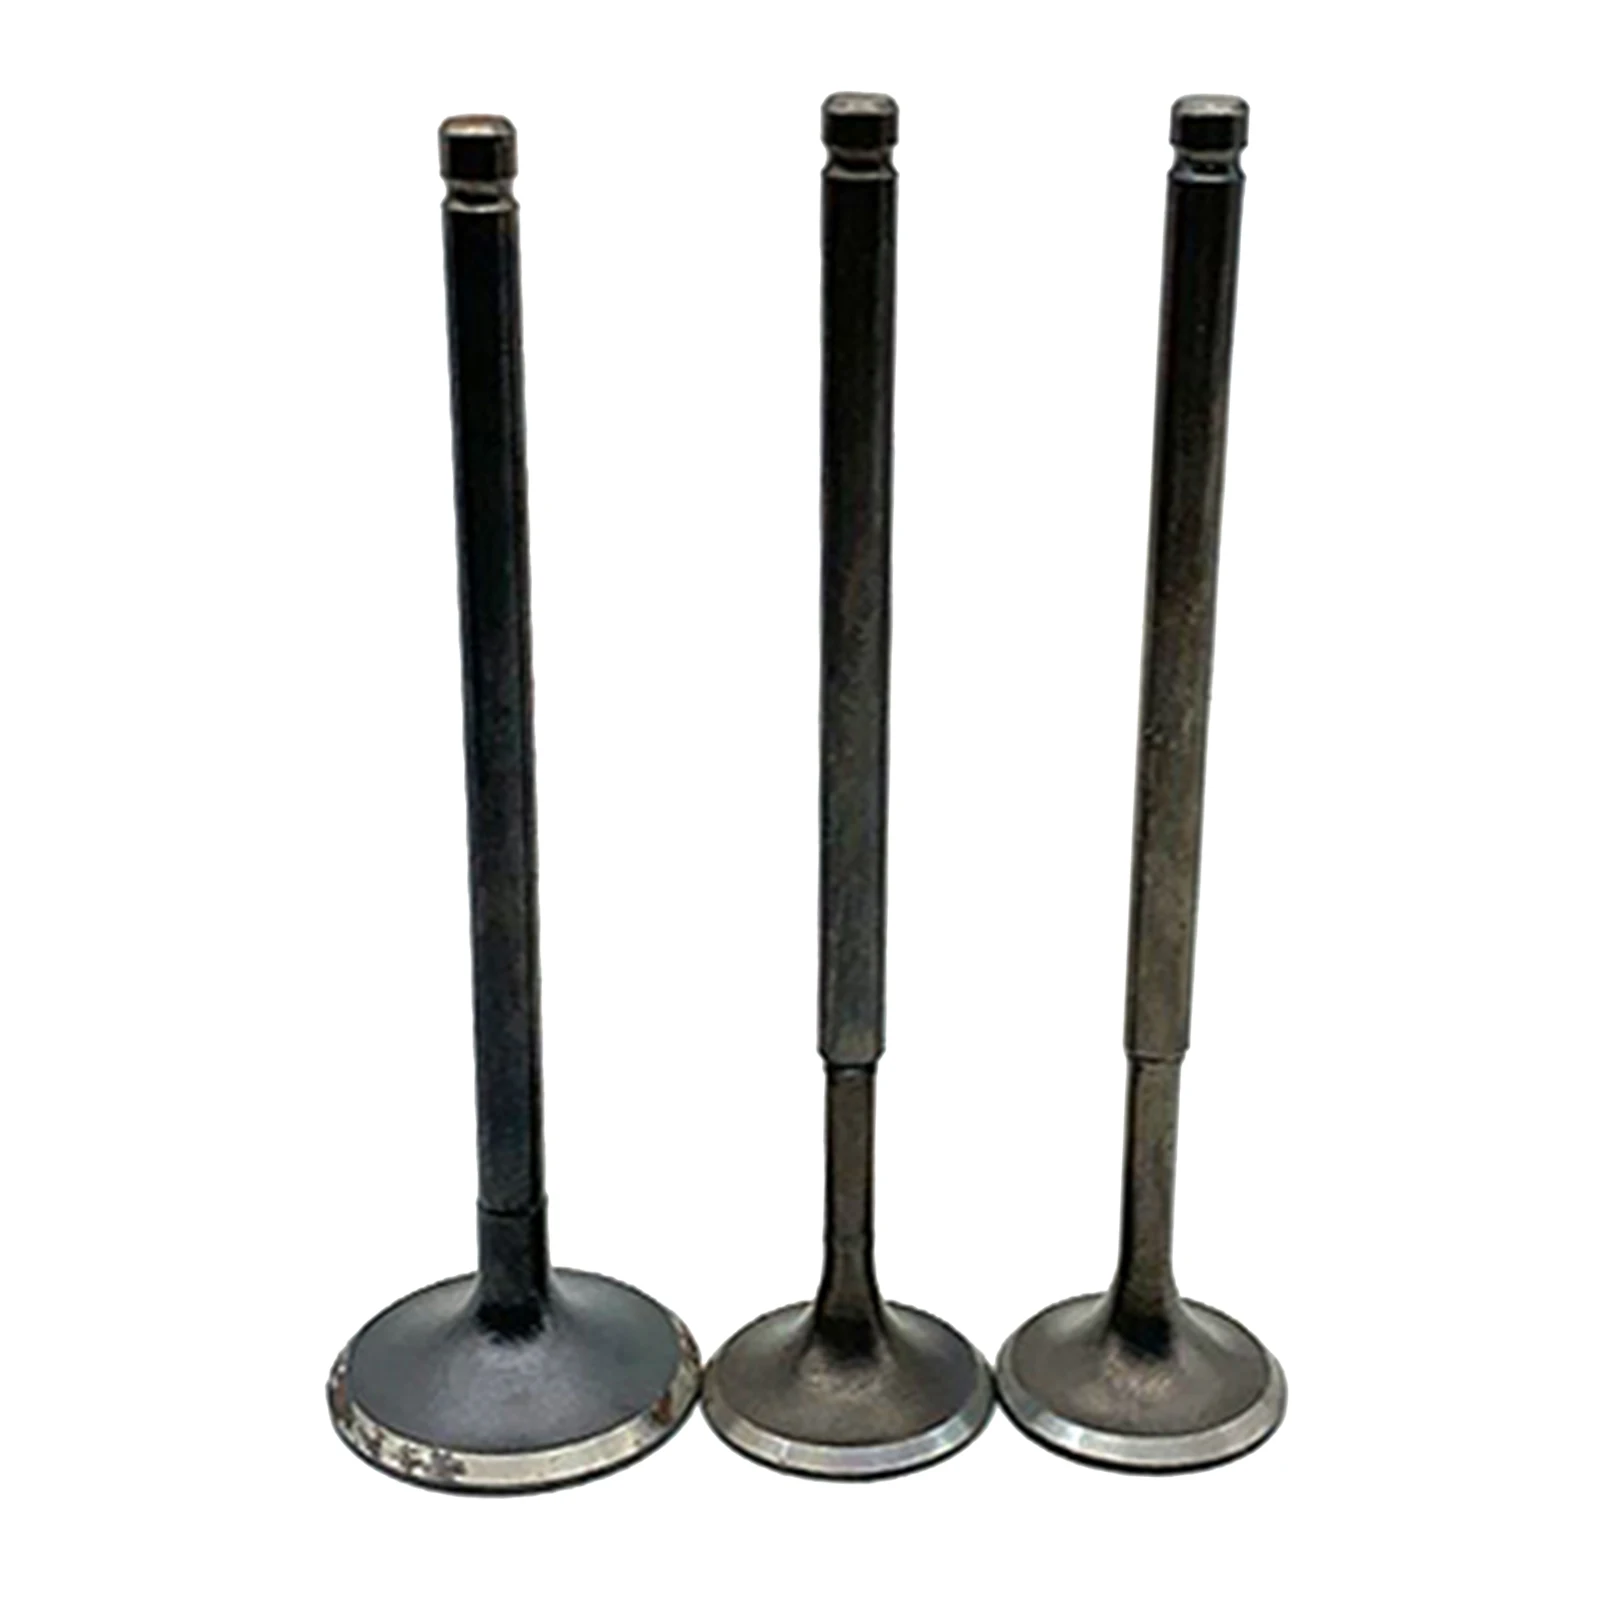 Engine Intake Valves & Exhaust Valves for Honda STEED400 STEED 400 NV400